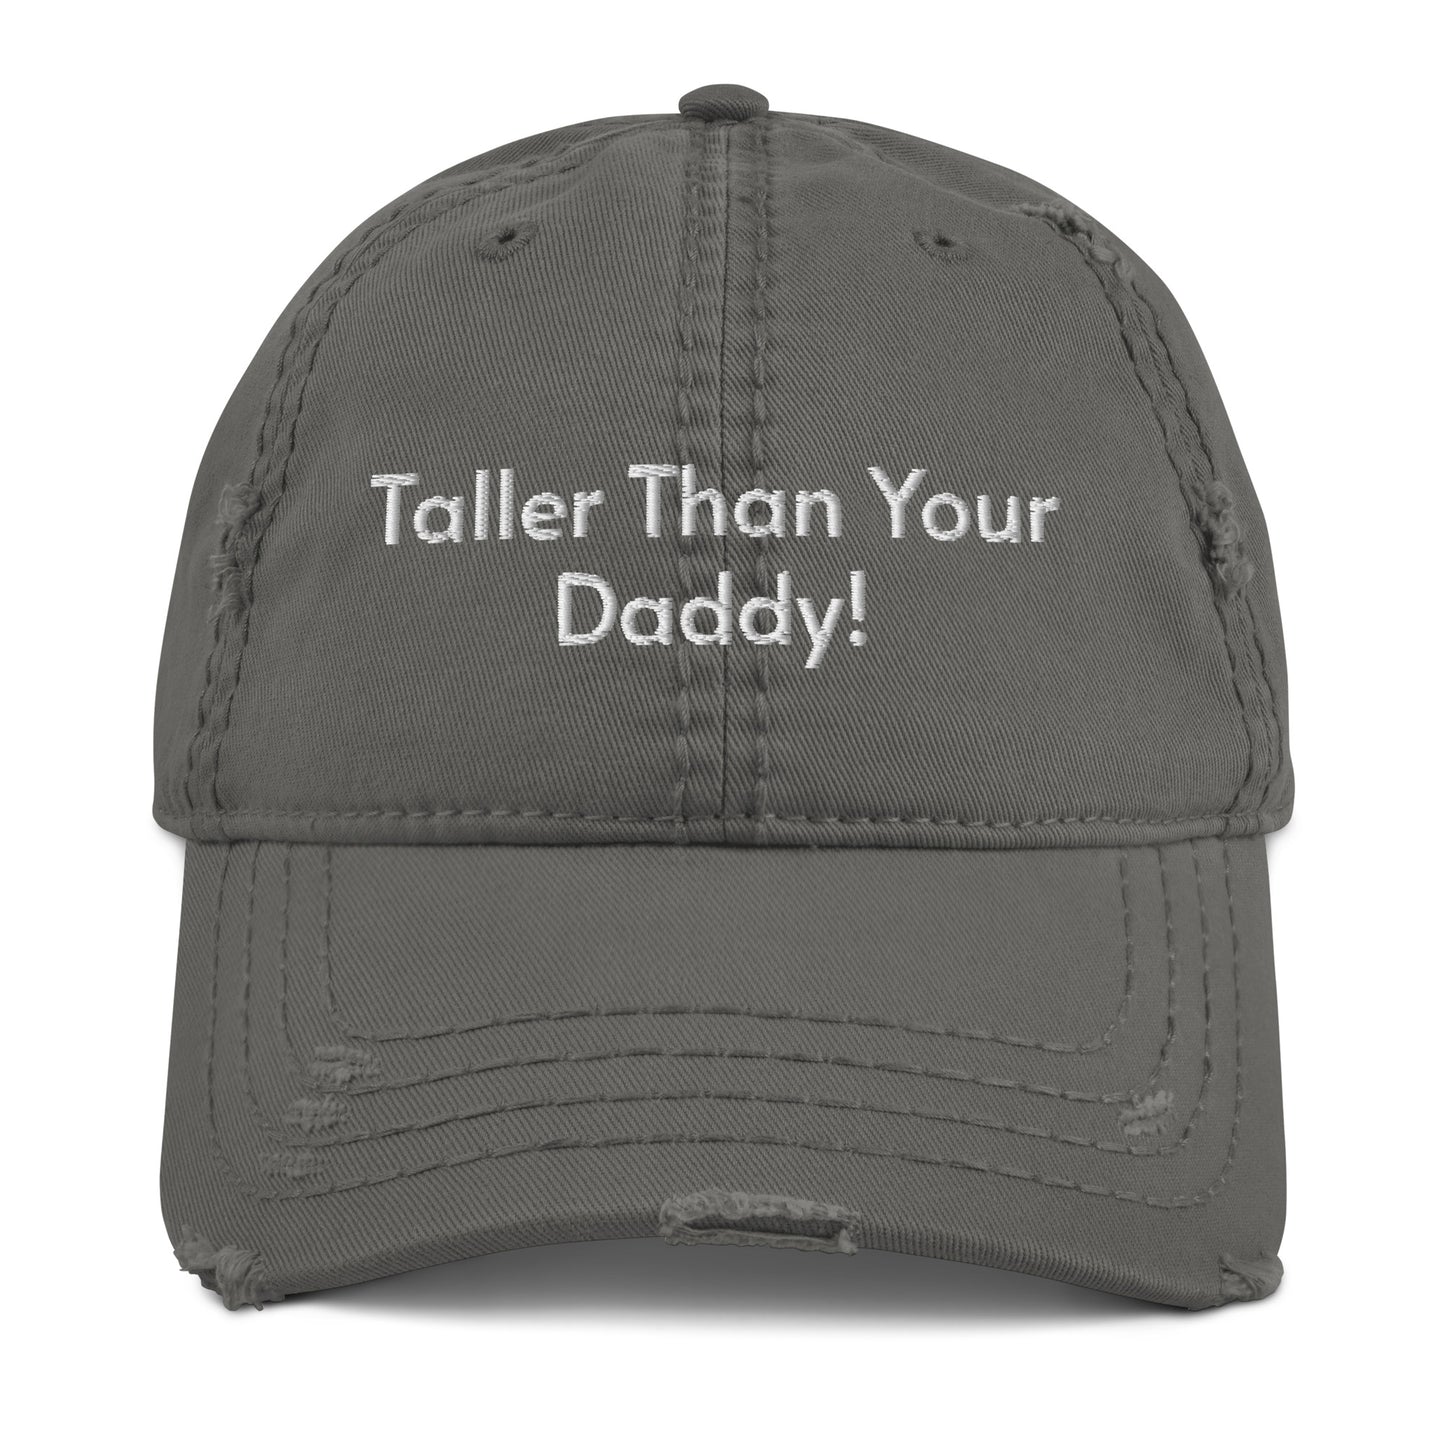 'Taller than your Daddy' Distressed Hat